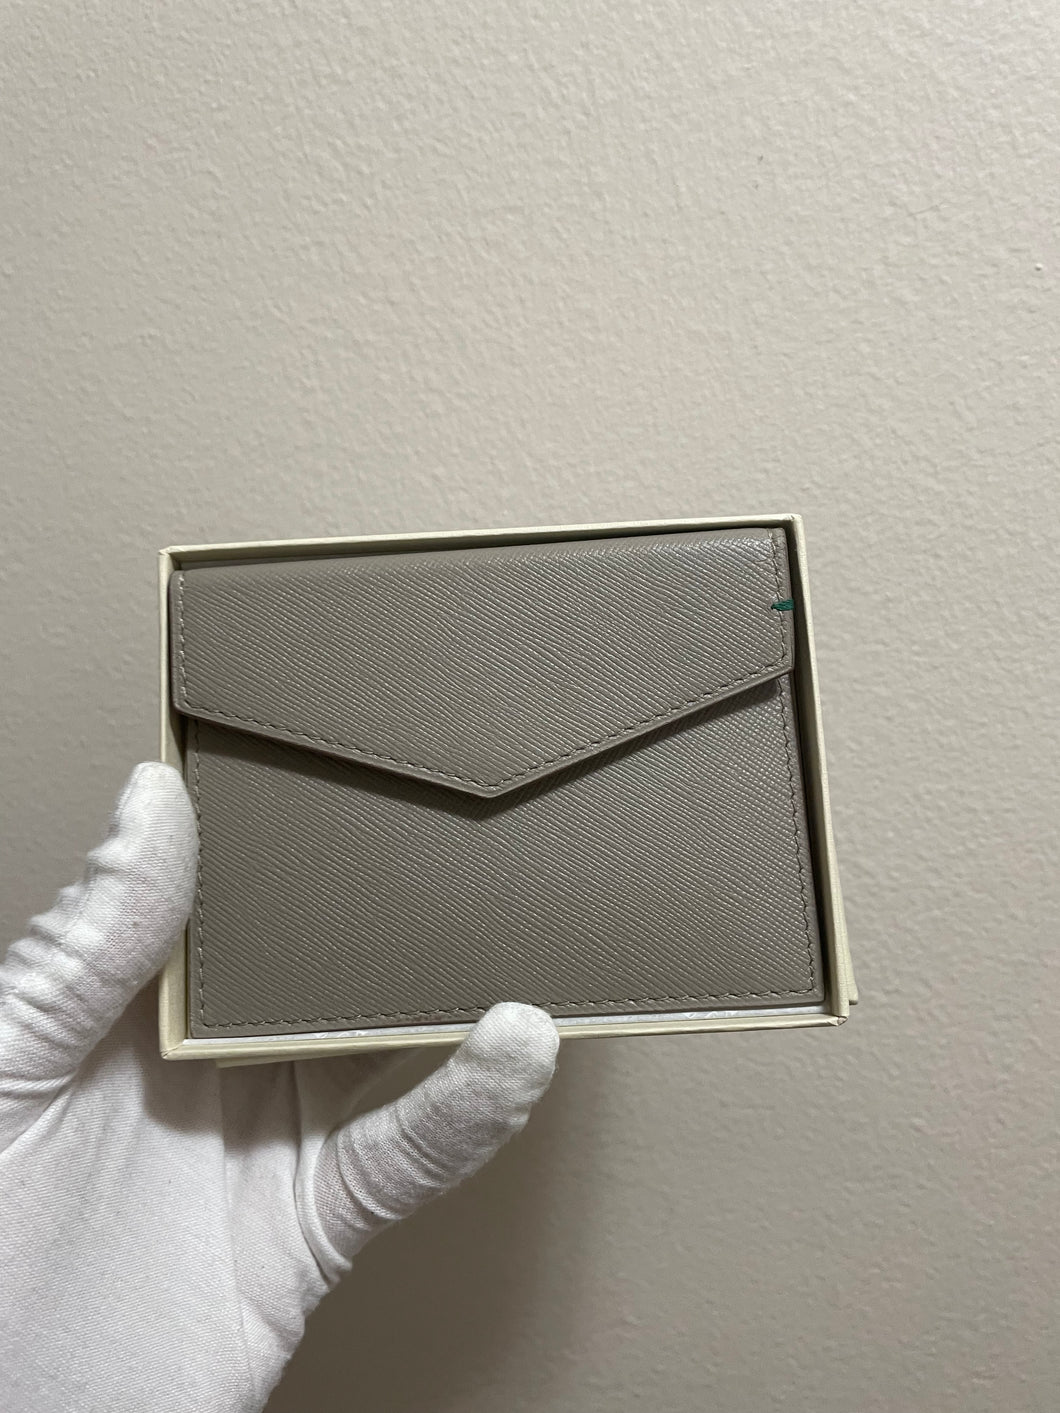 Brand new Rolex AD grey envelope wallet (1 available)